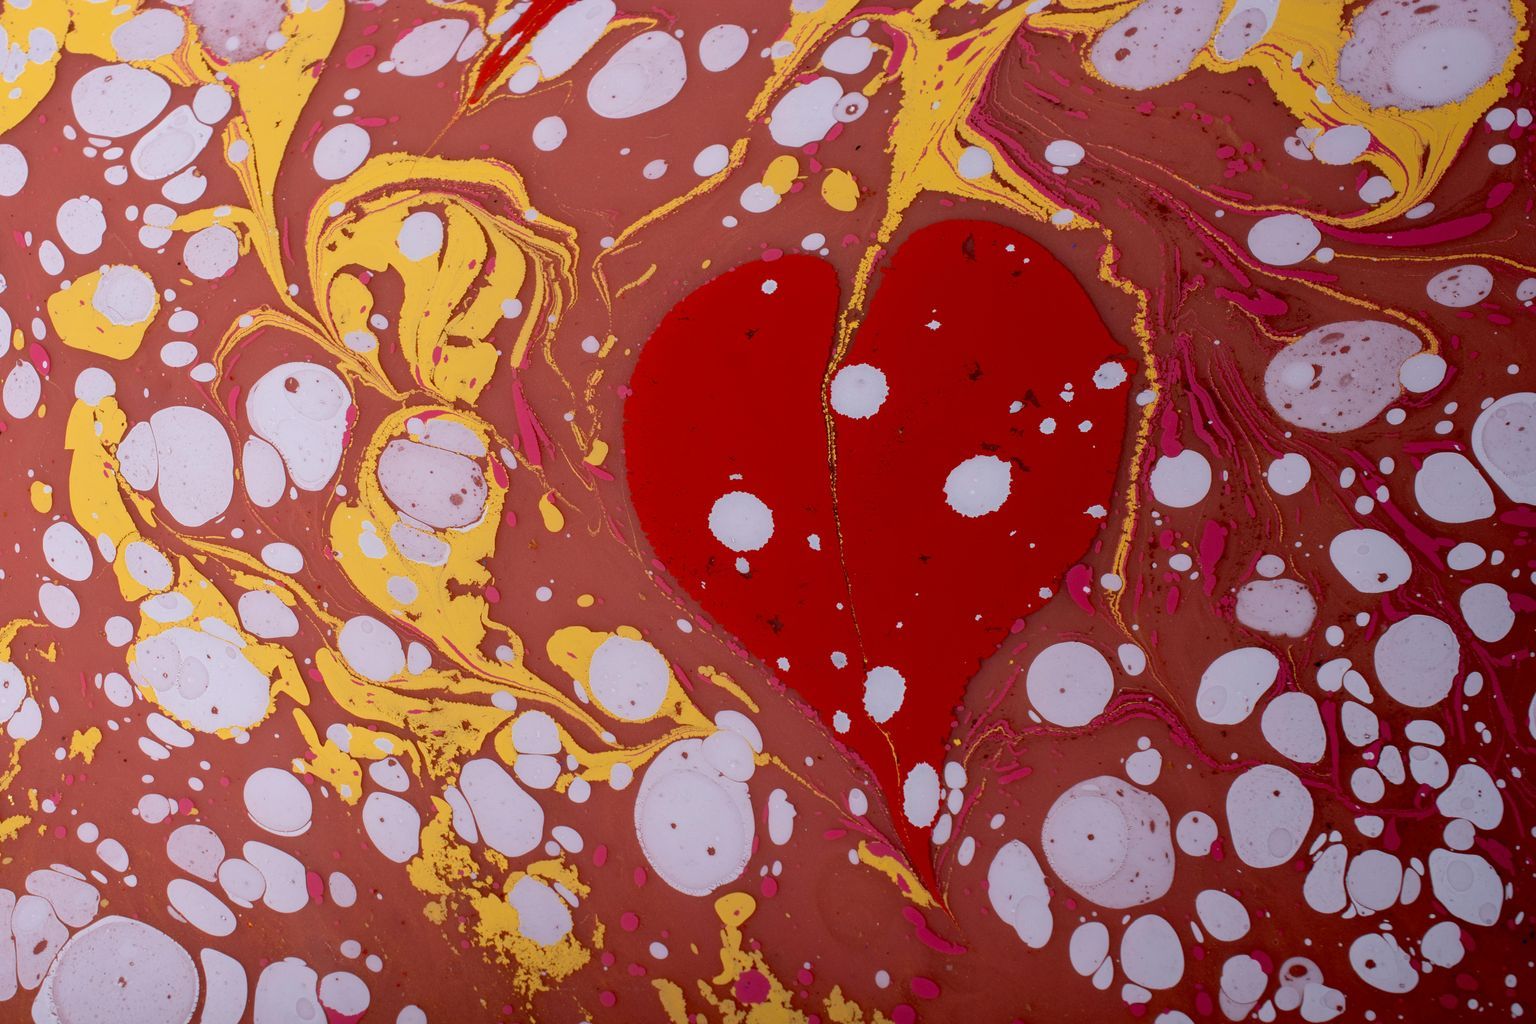 A red heart with bubbles and bubbles on it